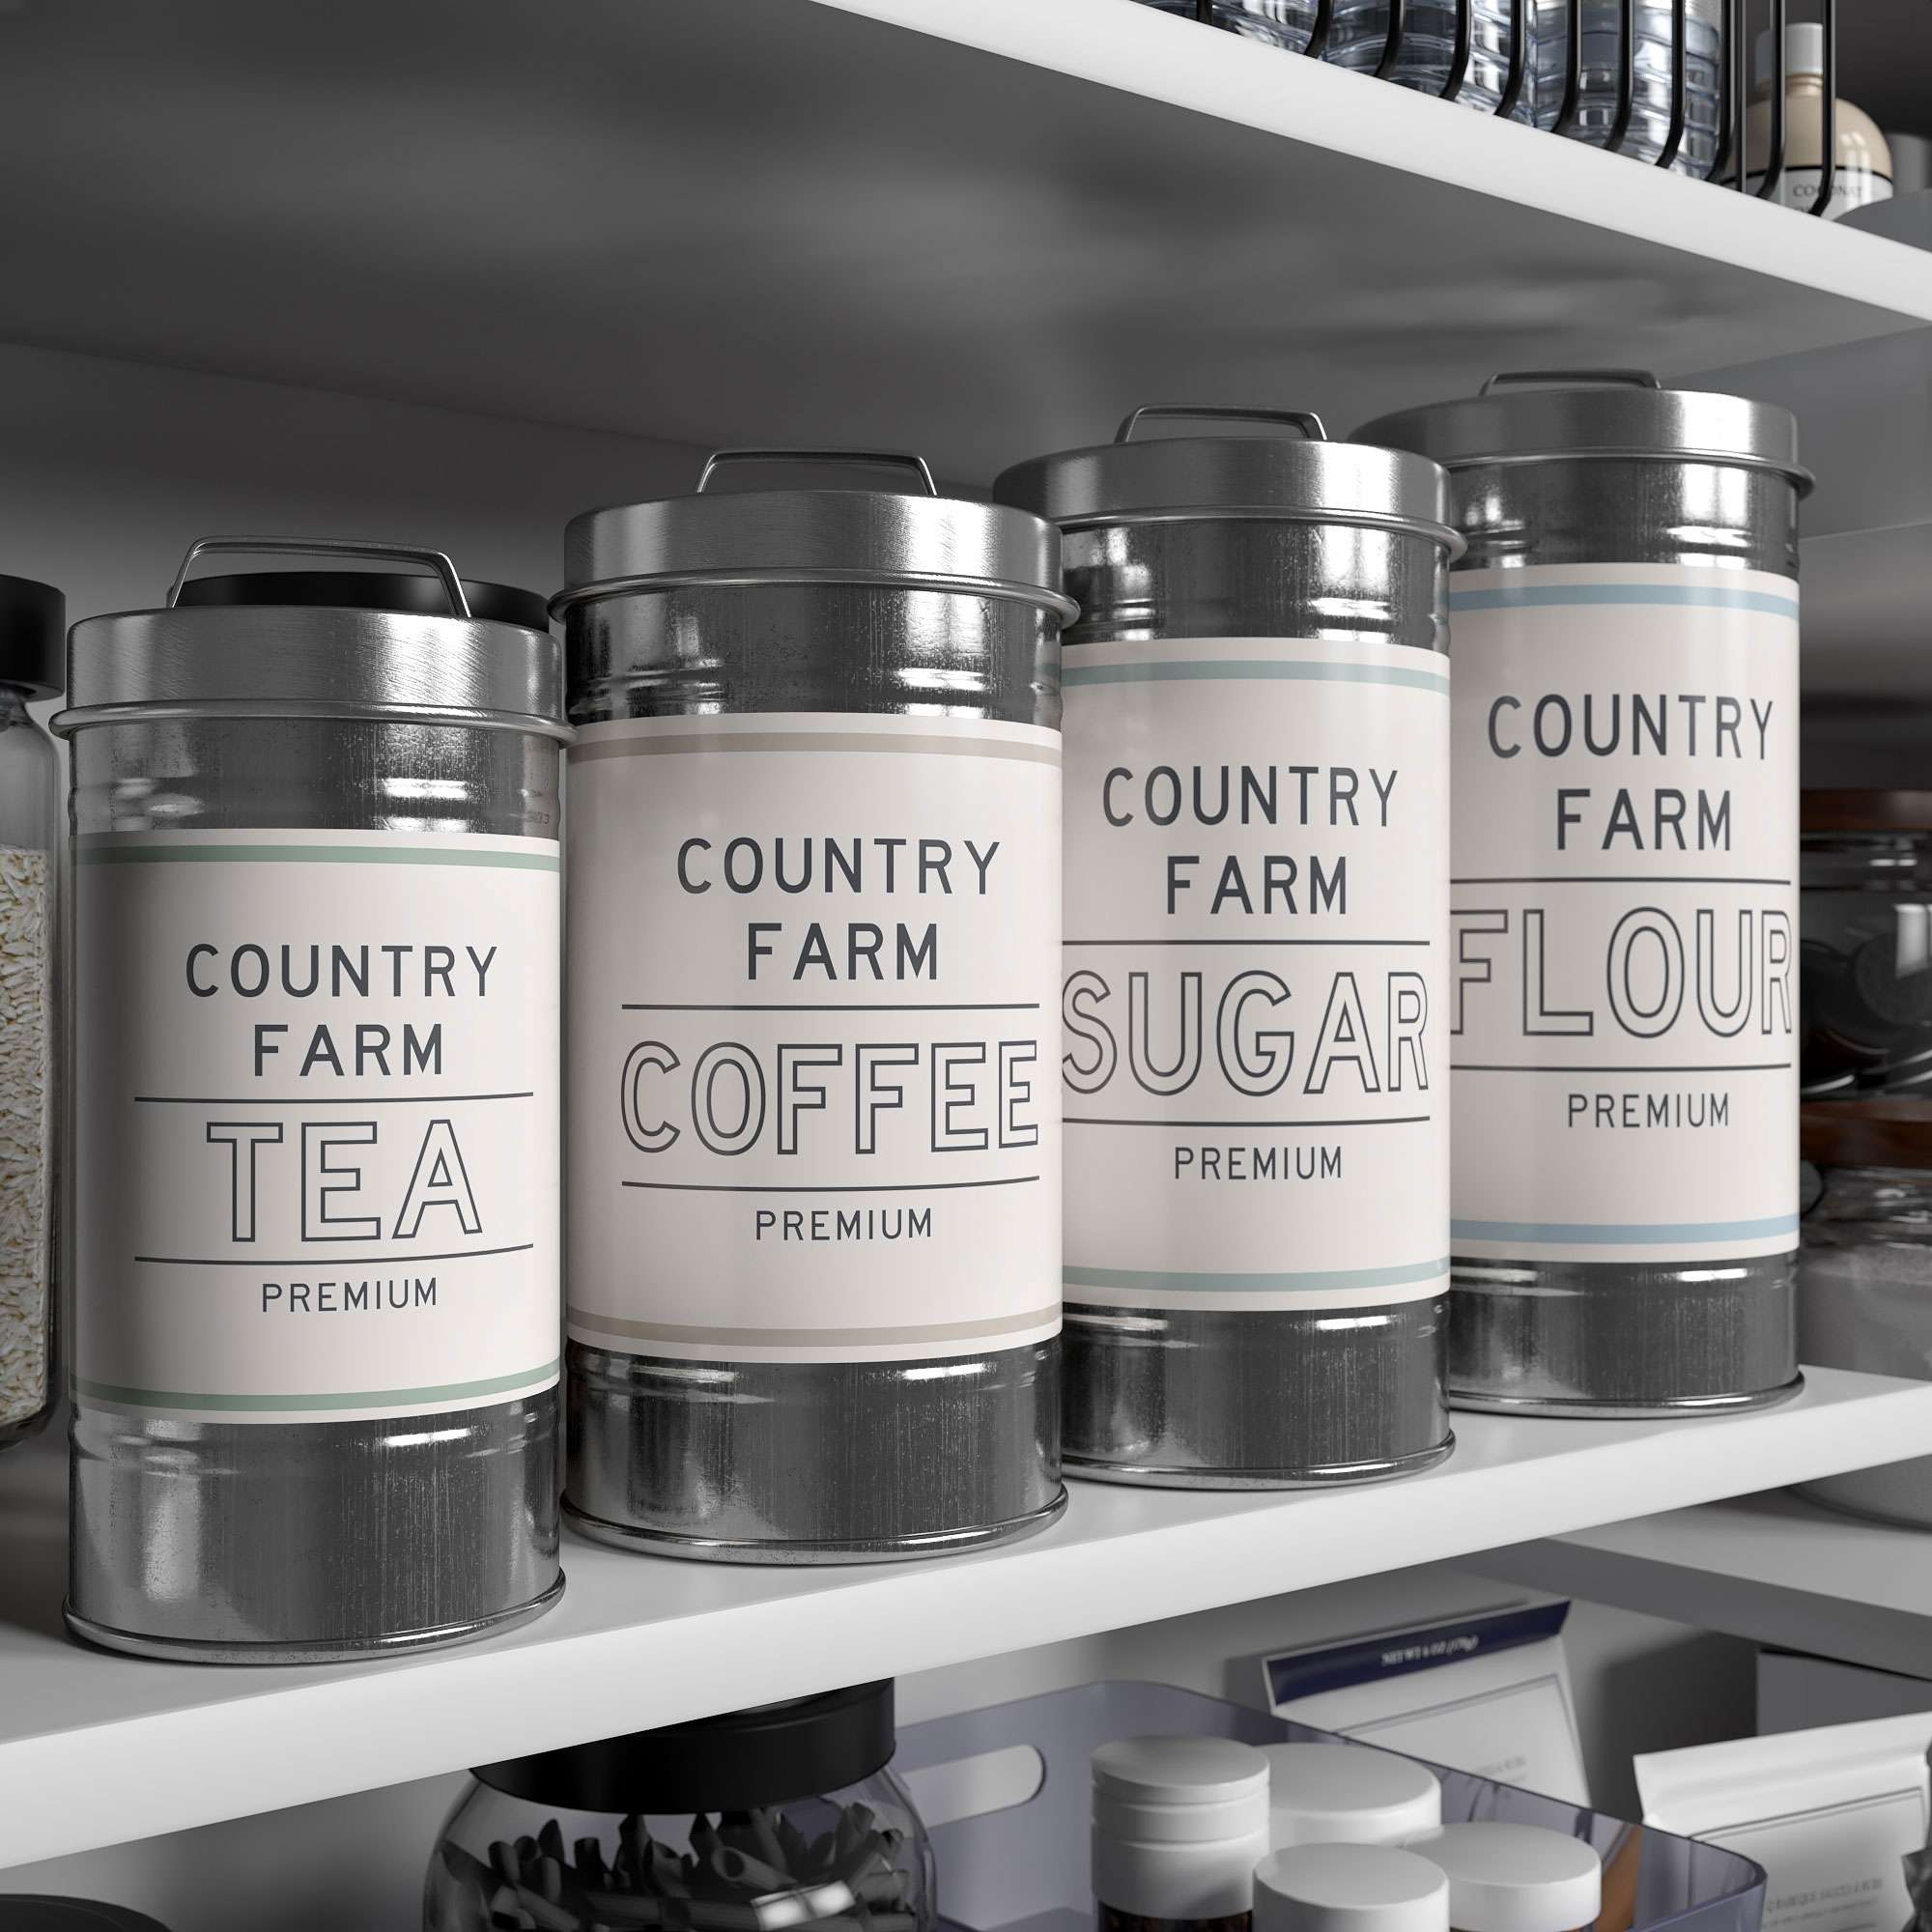 Barnyard Designs Metal Canister Sets for Kitchen Counter Vintage Kitchen Canisters, Country Rustic Farmhouse Decor for the Kitchen, Coffee Tea Sugar Flour Farmhouse Kitchen Decor, Set of 4 - image 3 of 6